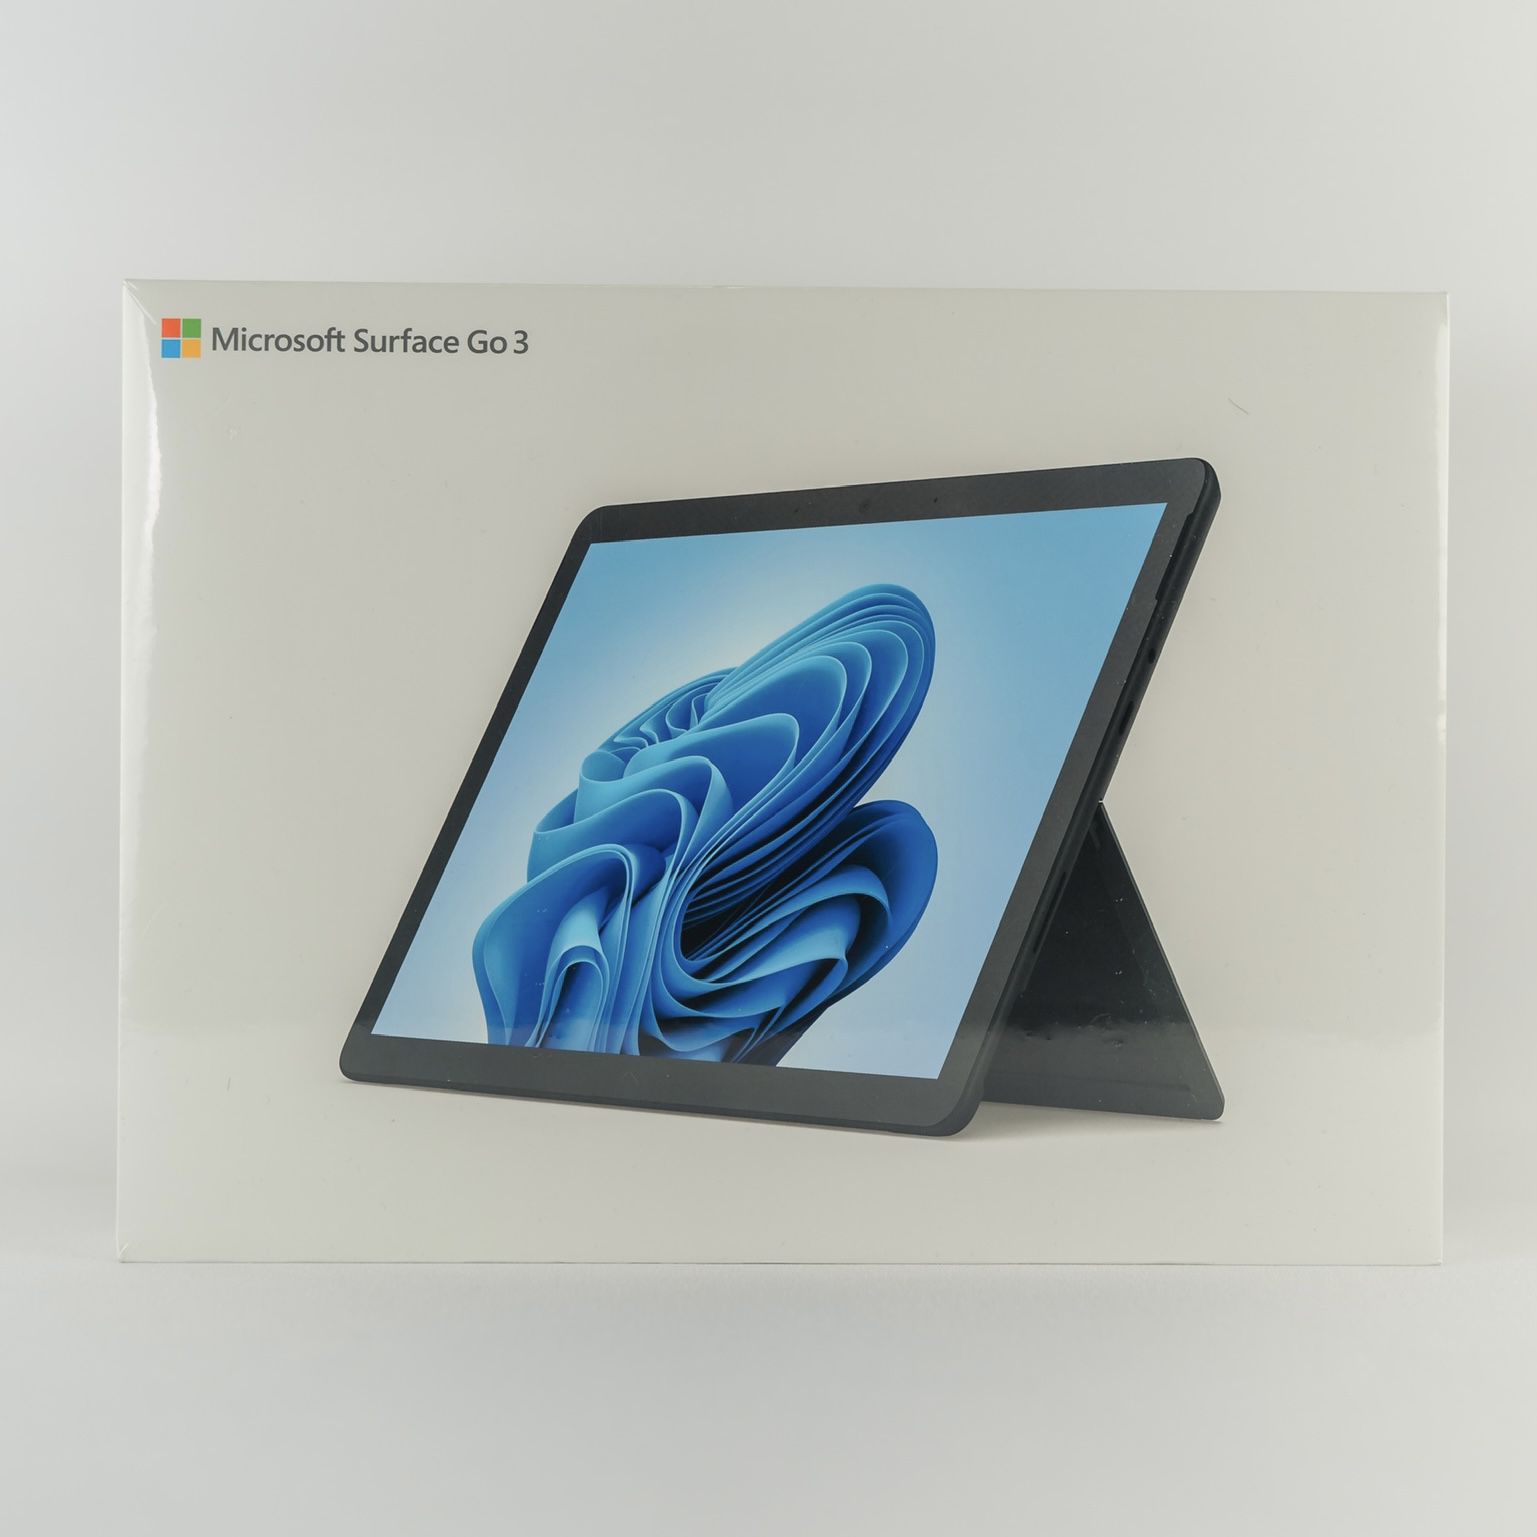 Microsoft Surface Go 3 Tablet - New